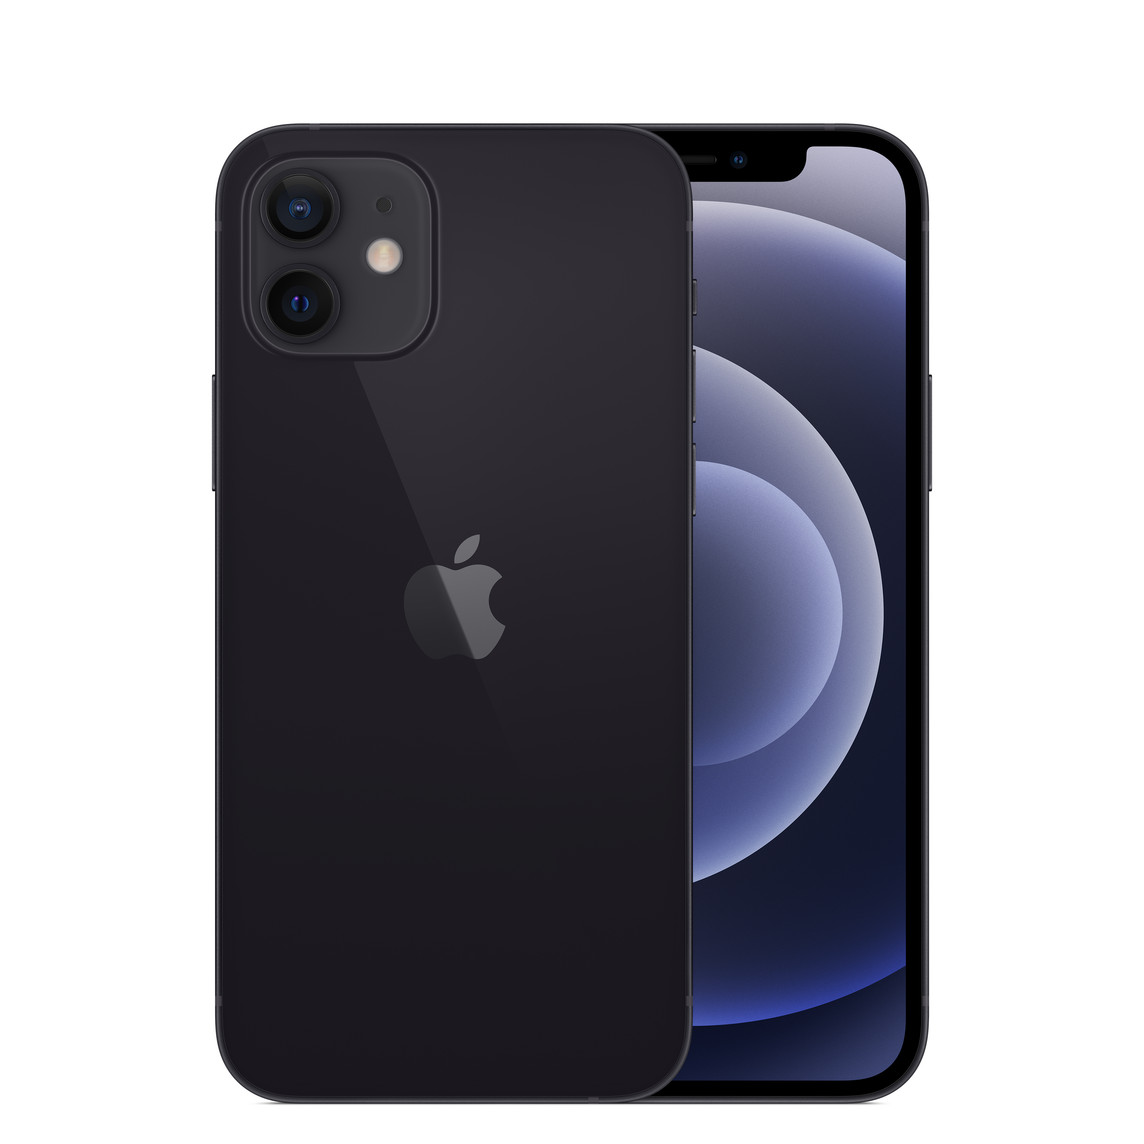 Back, black iPhone 12, Dual camera system with True Tone flash, microphone. Front, all-screen display